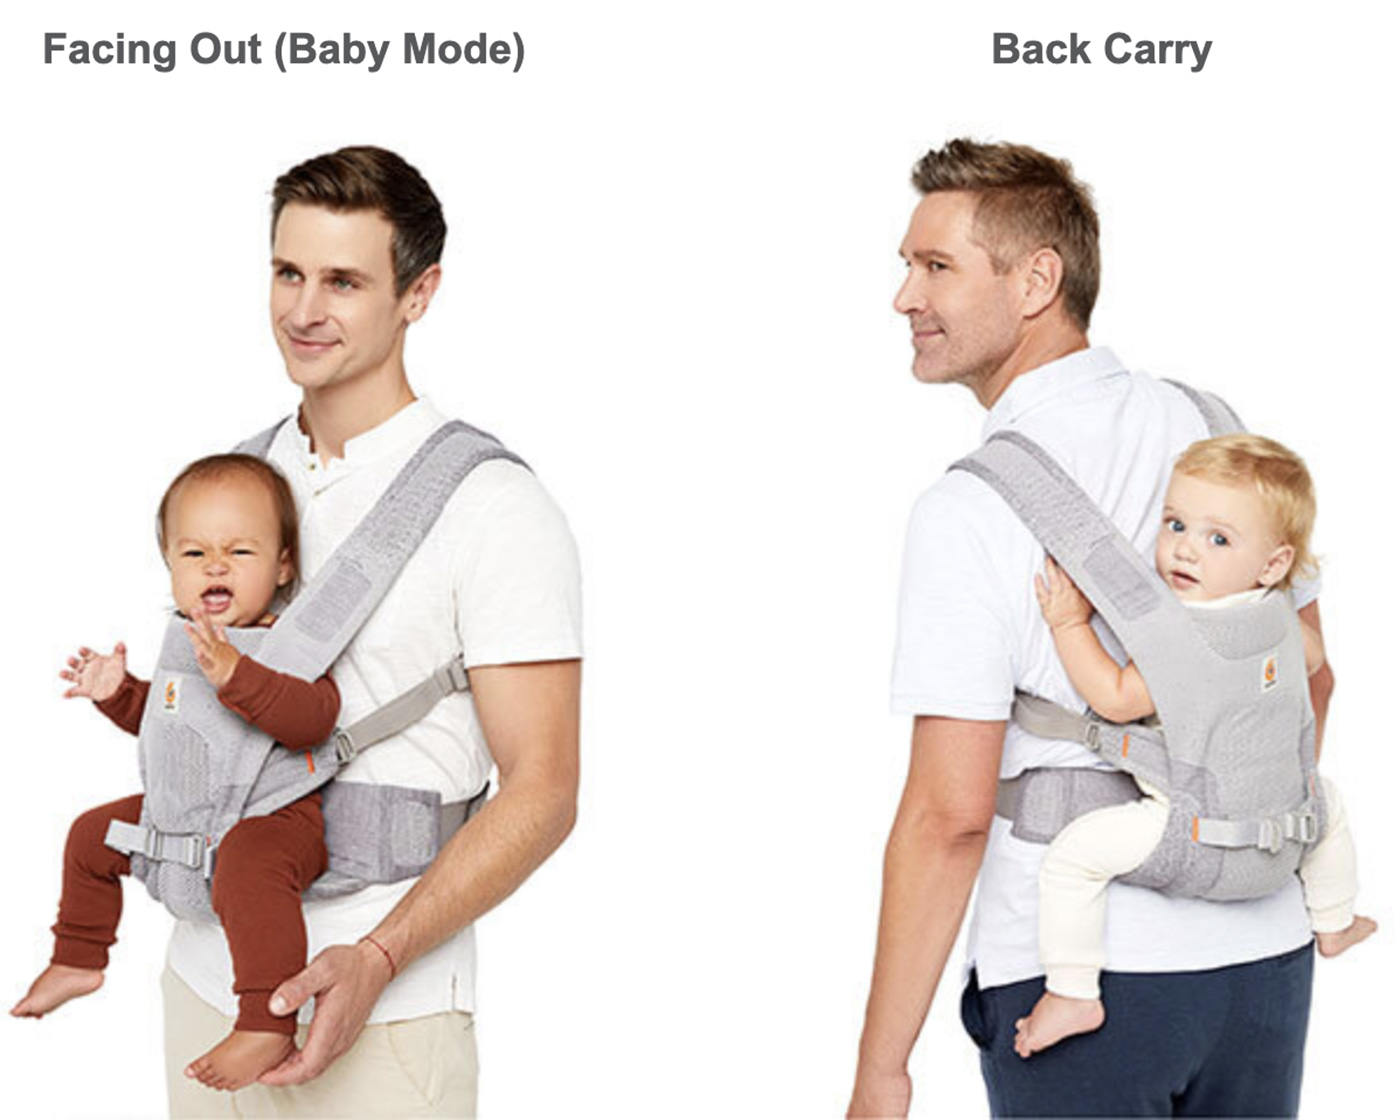 Facing Out Baby Mode and Back Carry